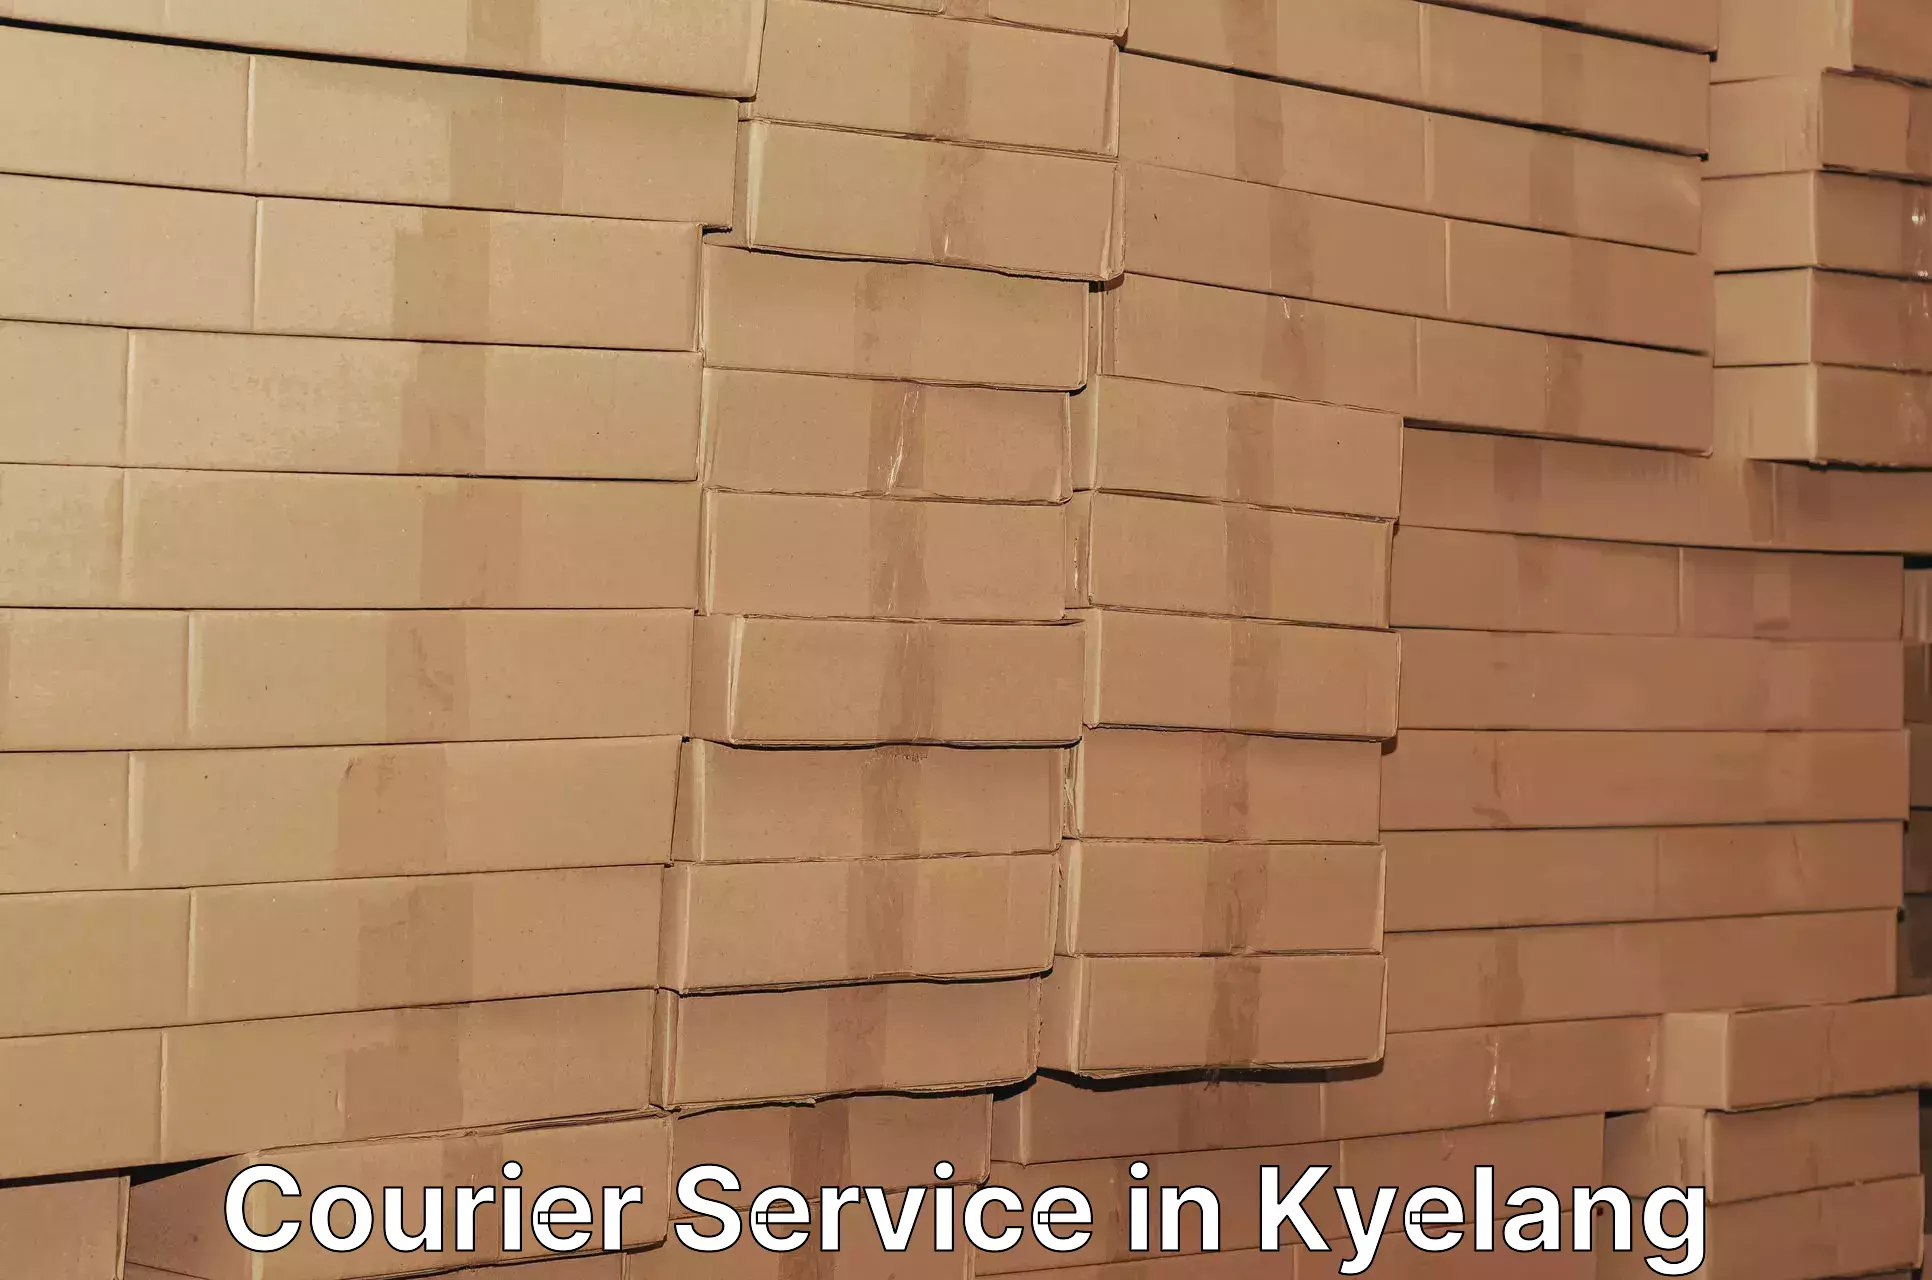 Modern courier technology in Kyelang